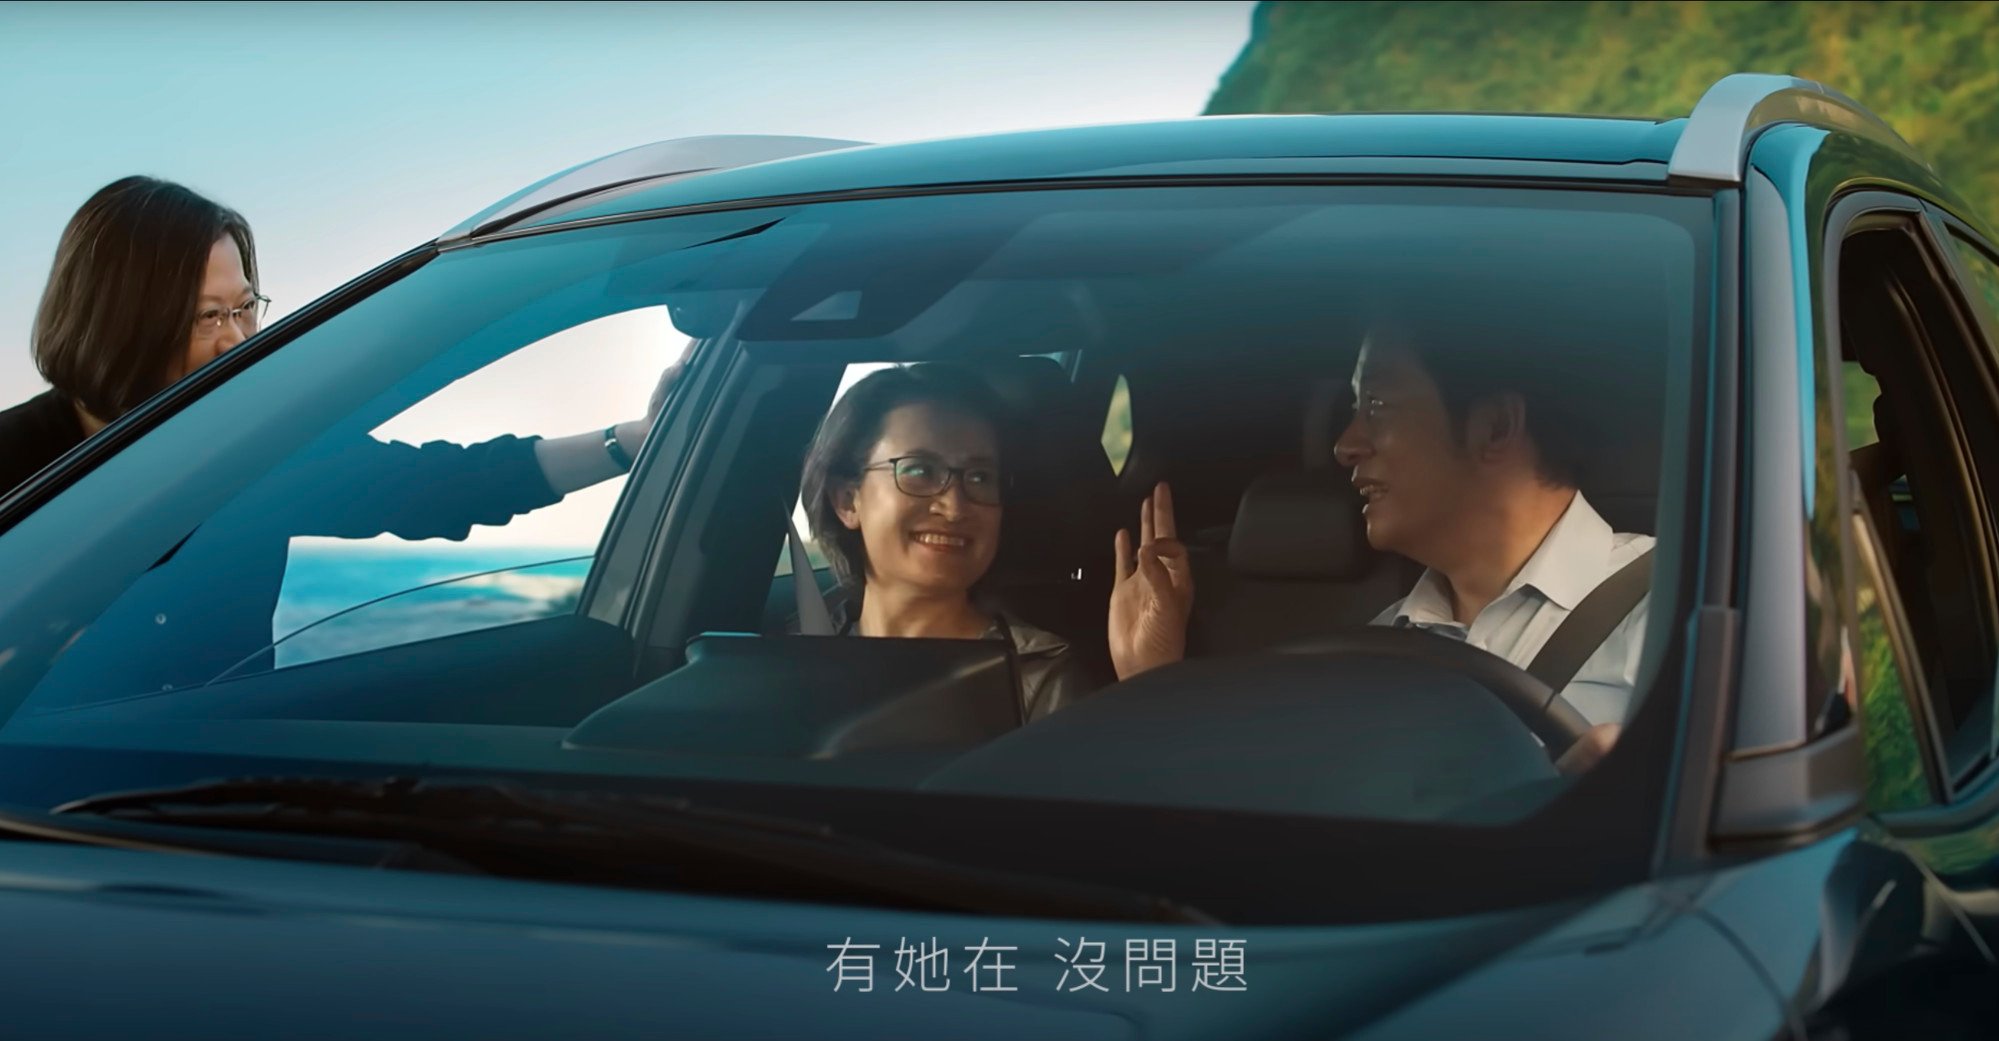 In the video, Tsai Ing-wen (left) hands over the car key to William Lai (right) and Hsiao Bi-khim takes a seat next to him. Photo: YouTube / Lai Ching-te